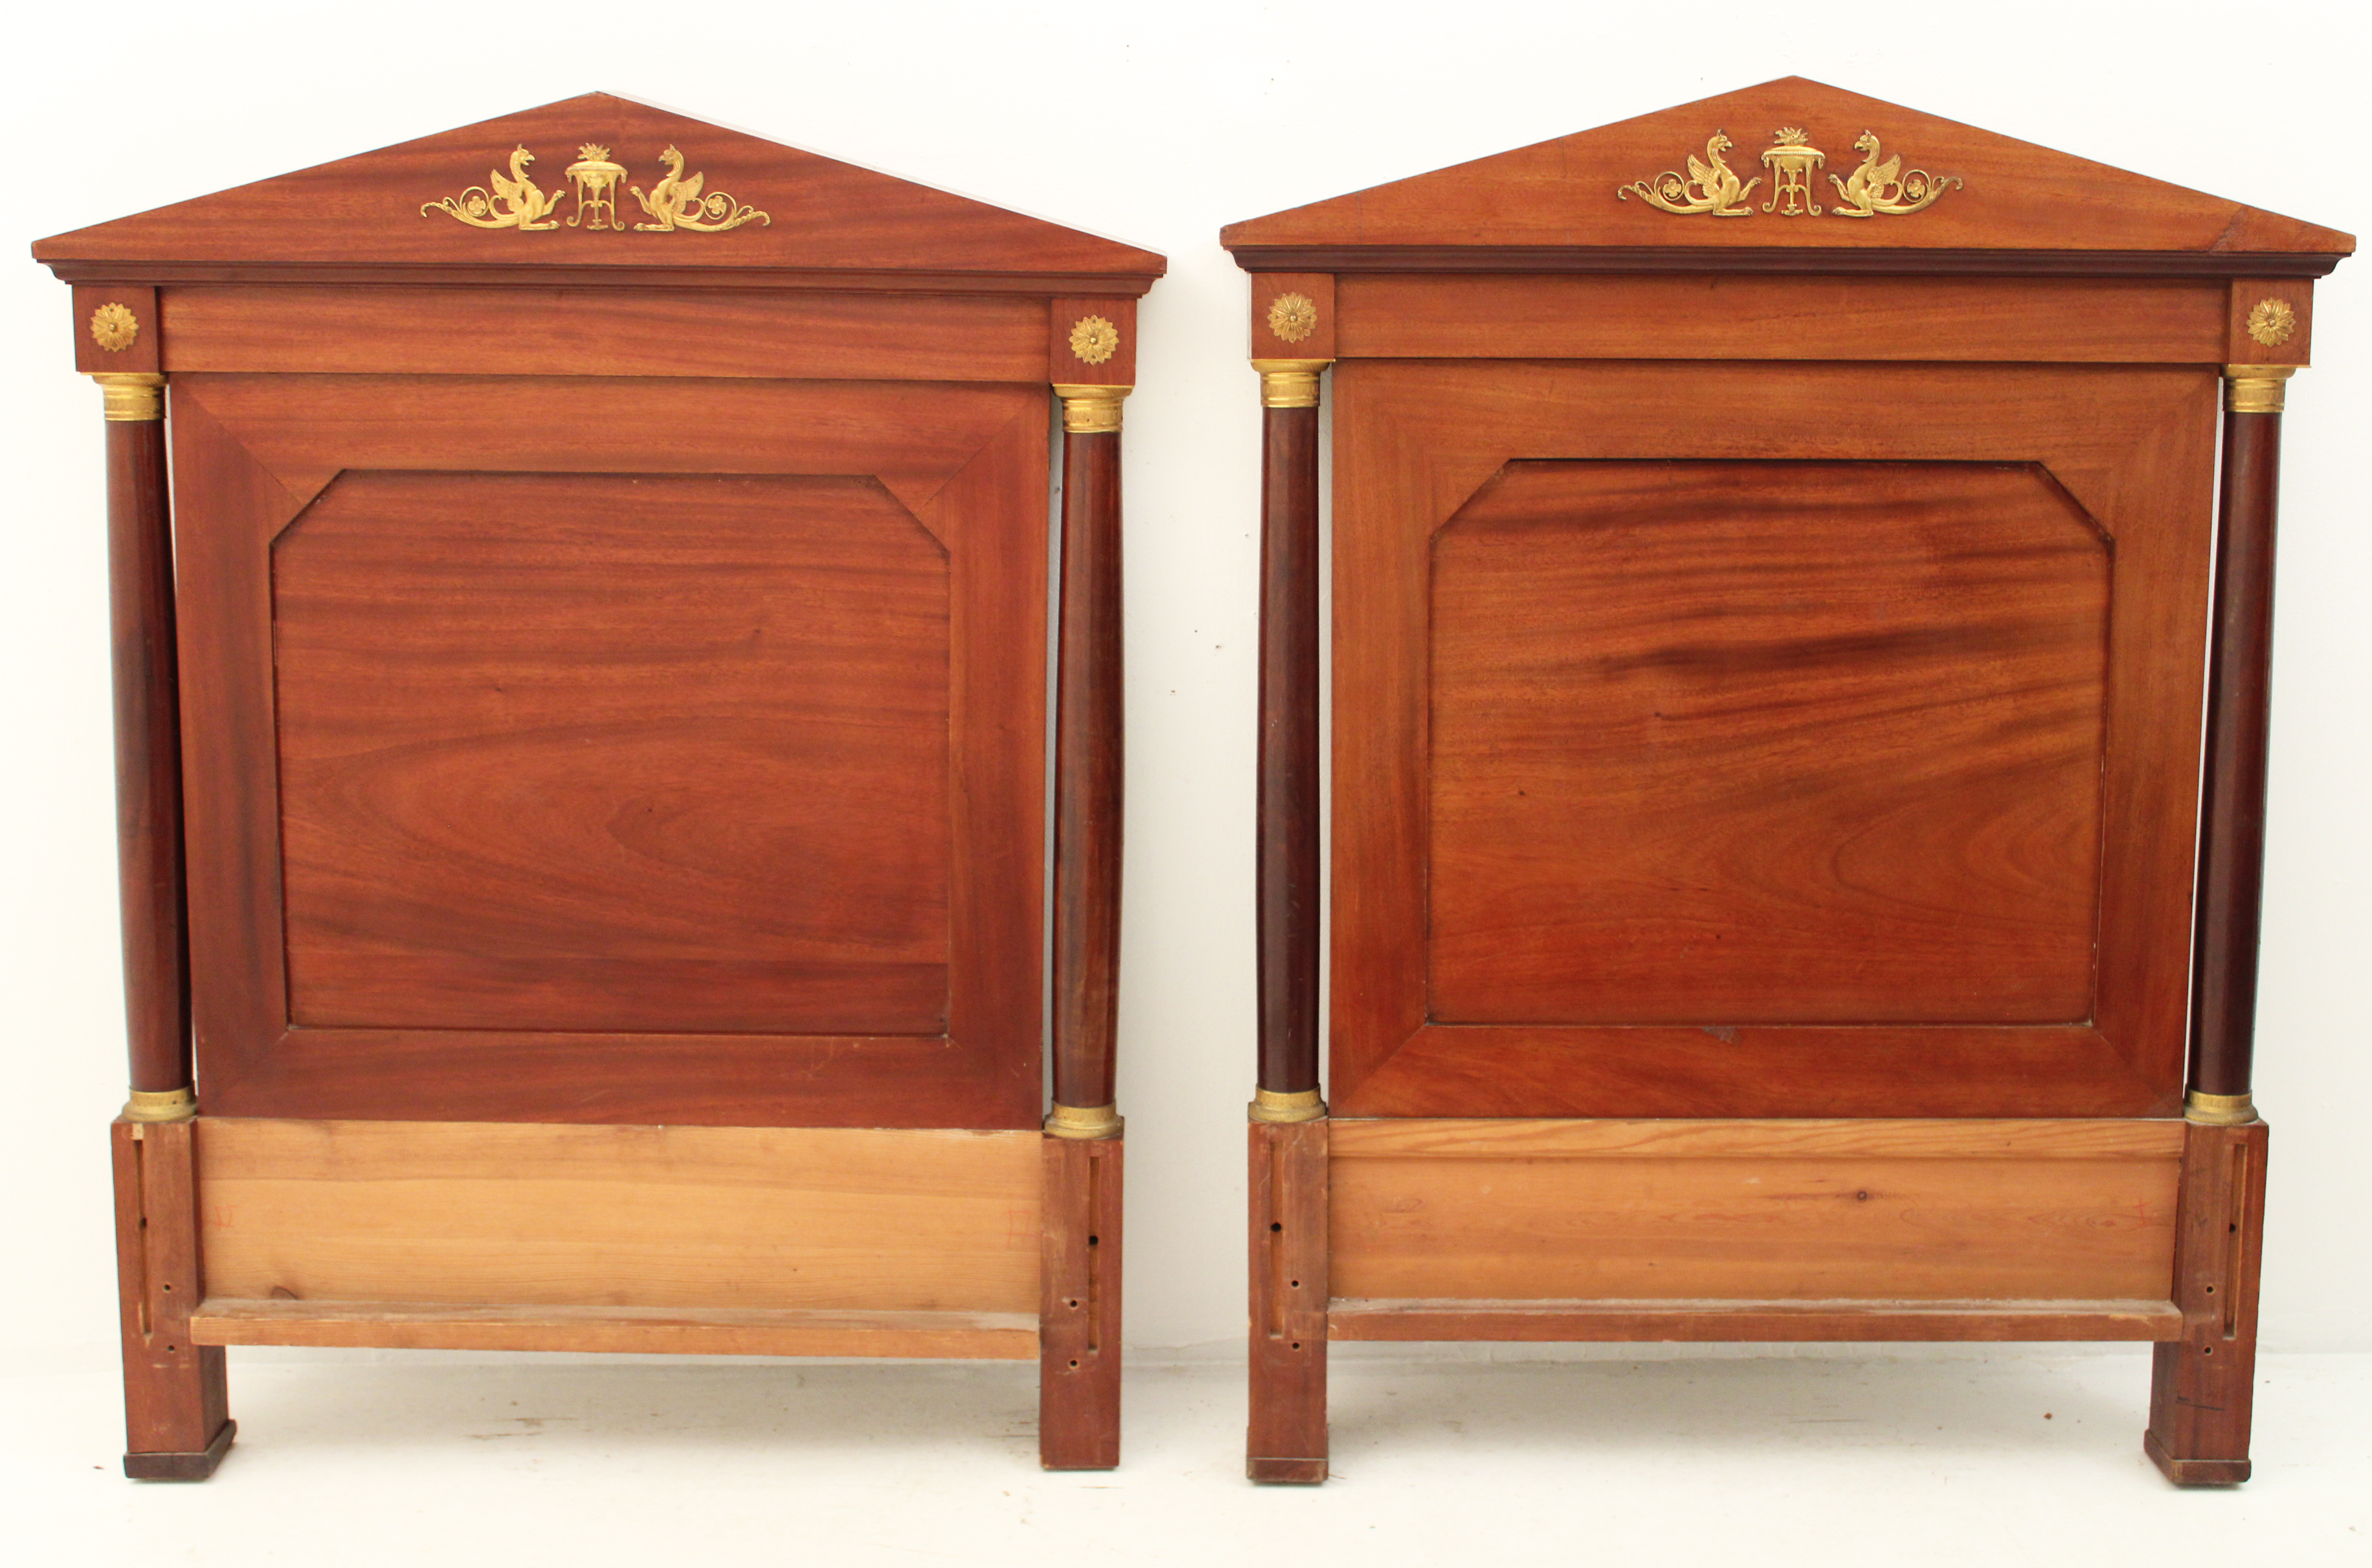 PR. OF FRENCH EMPIRE TWIN HEADBOARDS